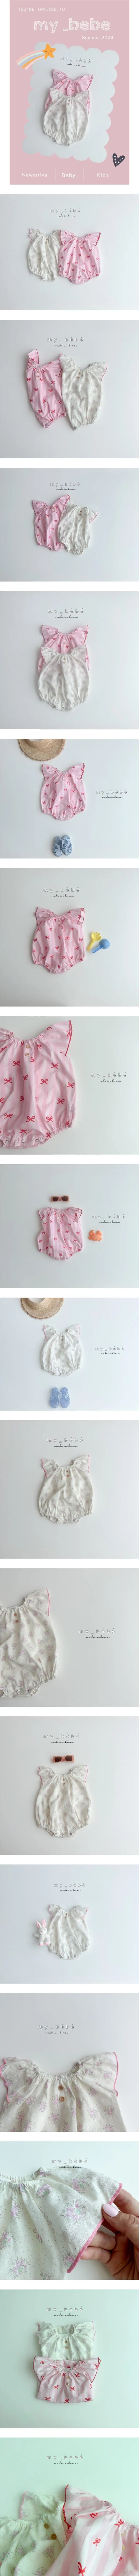 My Bebe - Korean Baby Fashion - #babyboutique - Bebe Point Color Body Suit - 2